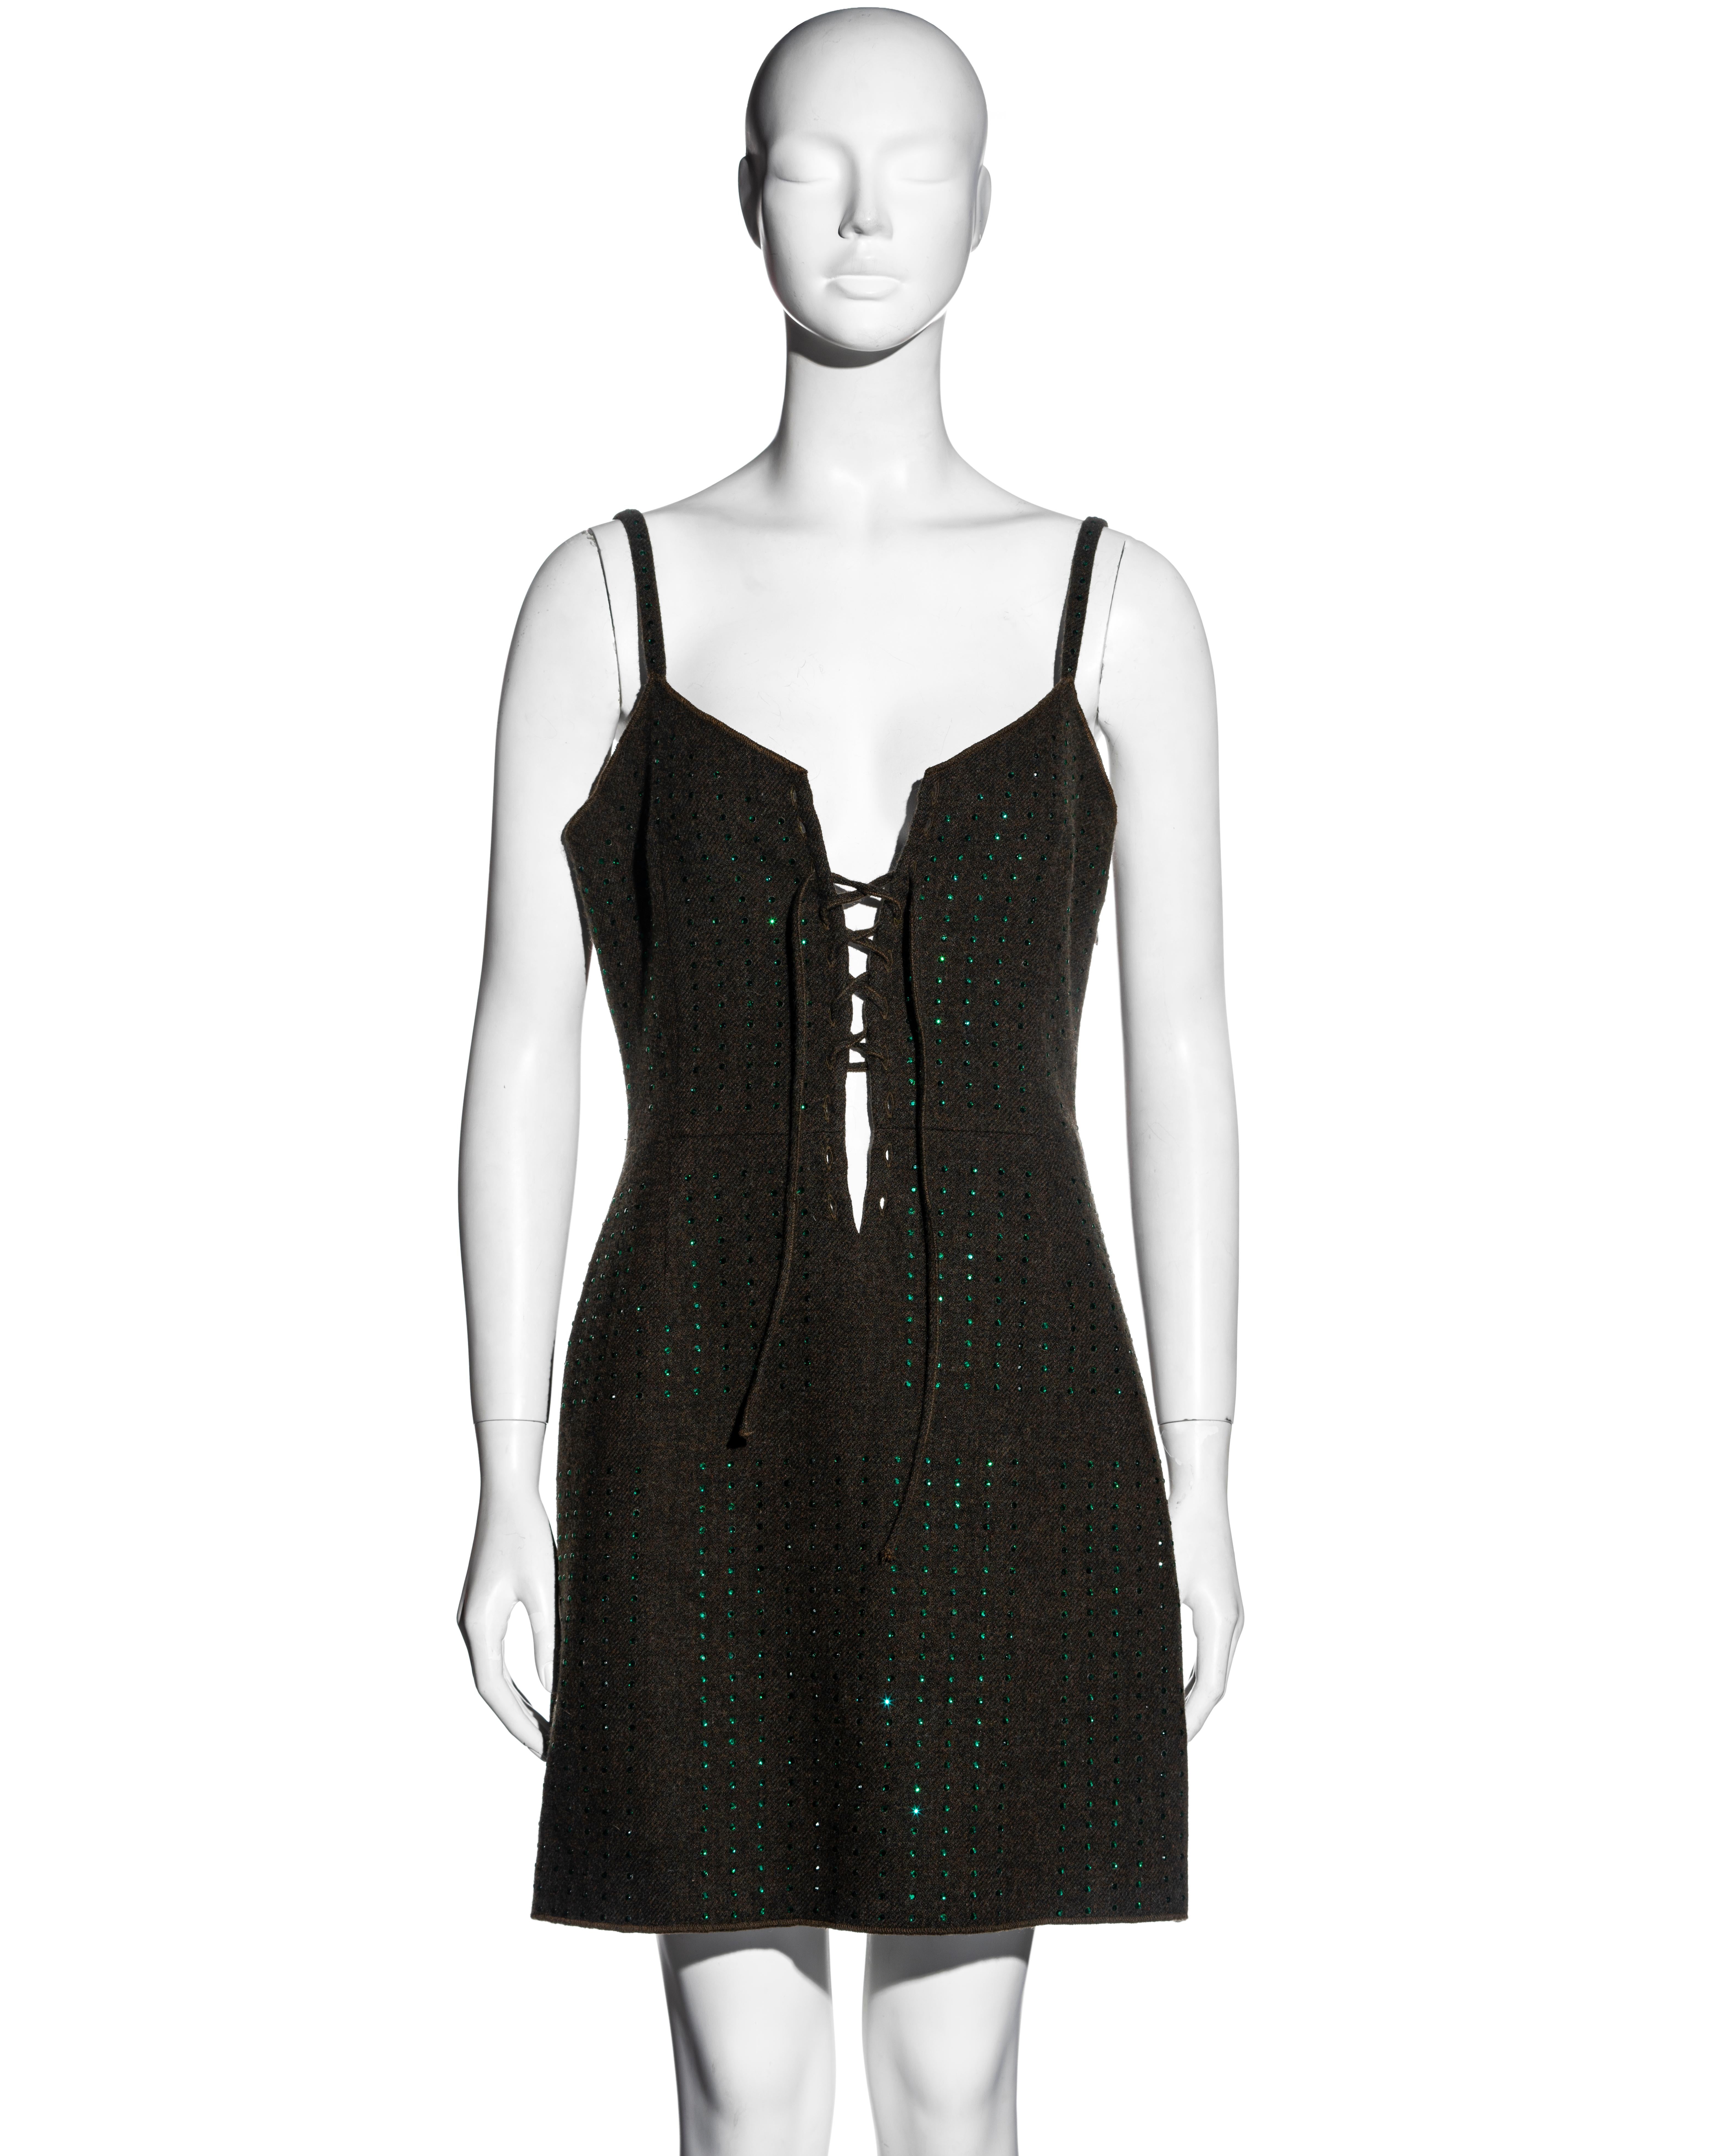 ▪ Miu Miu wool fleece slip dress
▪ Designed by Miuccia Prada 
▪ Allover flat-back crystals 
▪ Lace-up ties to the front opening 
▪ Loose fit 
▪ Fully lined 
▪ IT 42 - FR 38 - UK 10
▪ 100% Wool Fleece, Lining: 100% Acetate
▪ Spring-Summer 1998